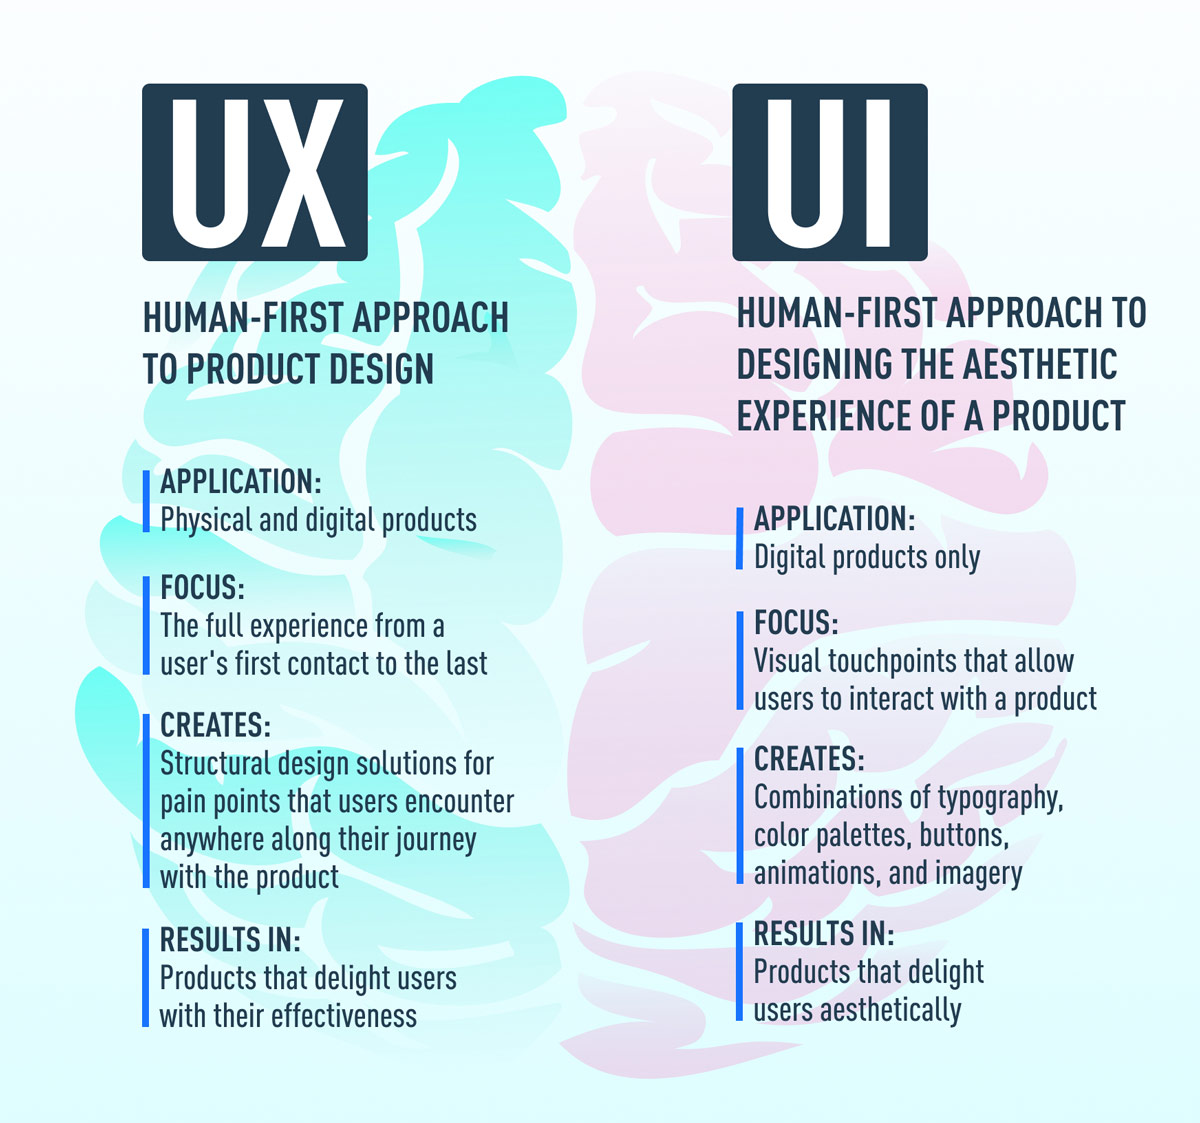 https://careerfoundry.com/en/blog/ux-design/the-difference-between-ux-and-ui-design-a-laymans-guide/